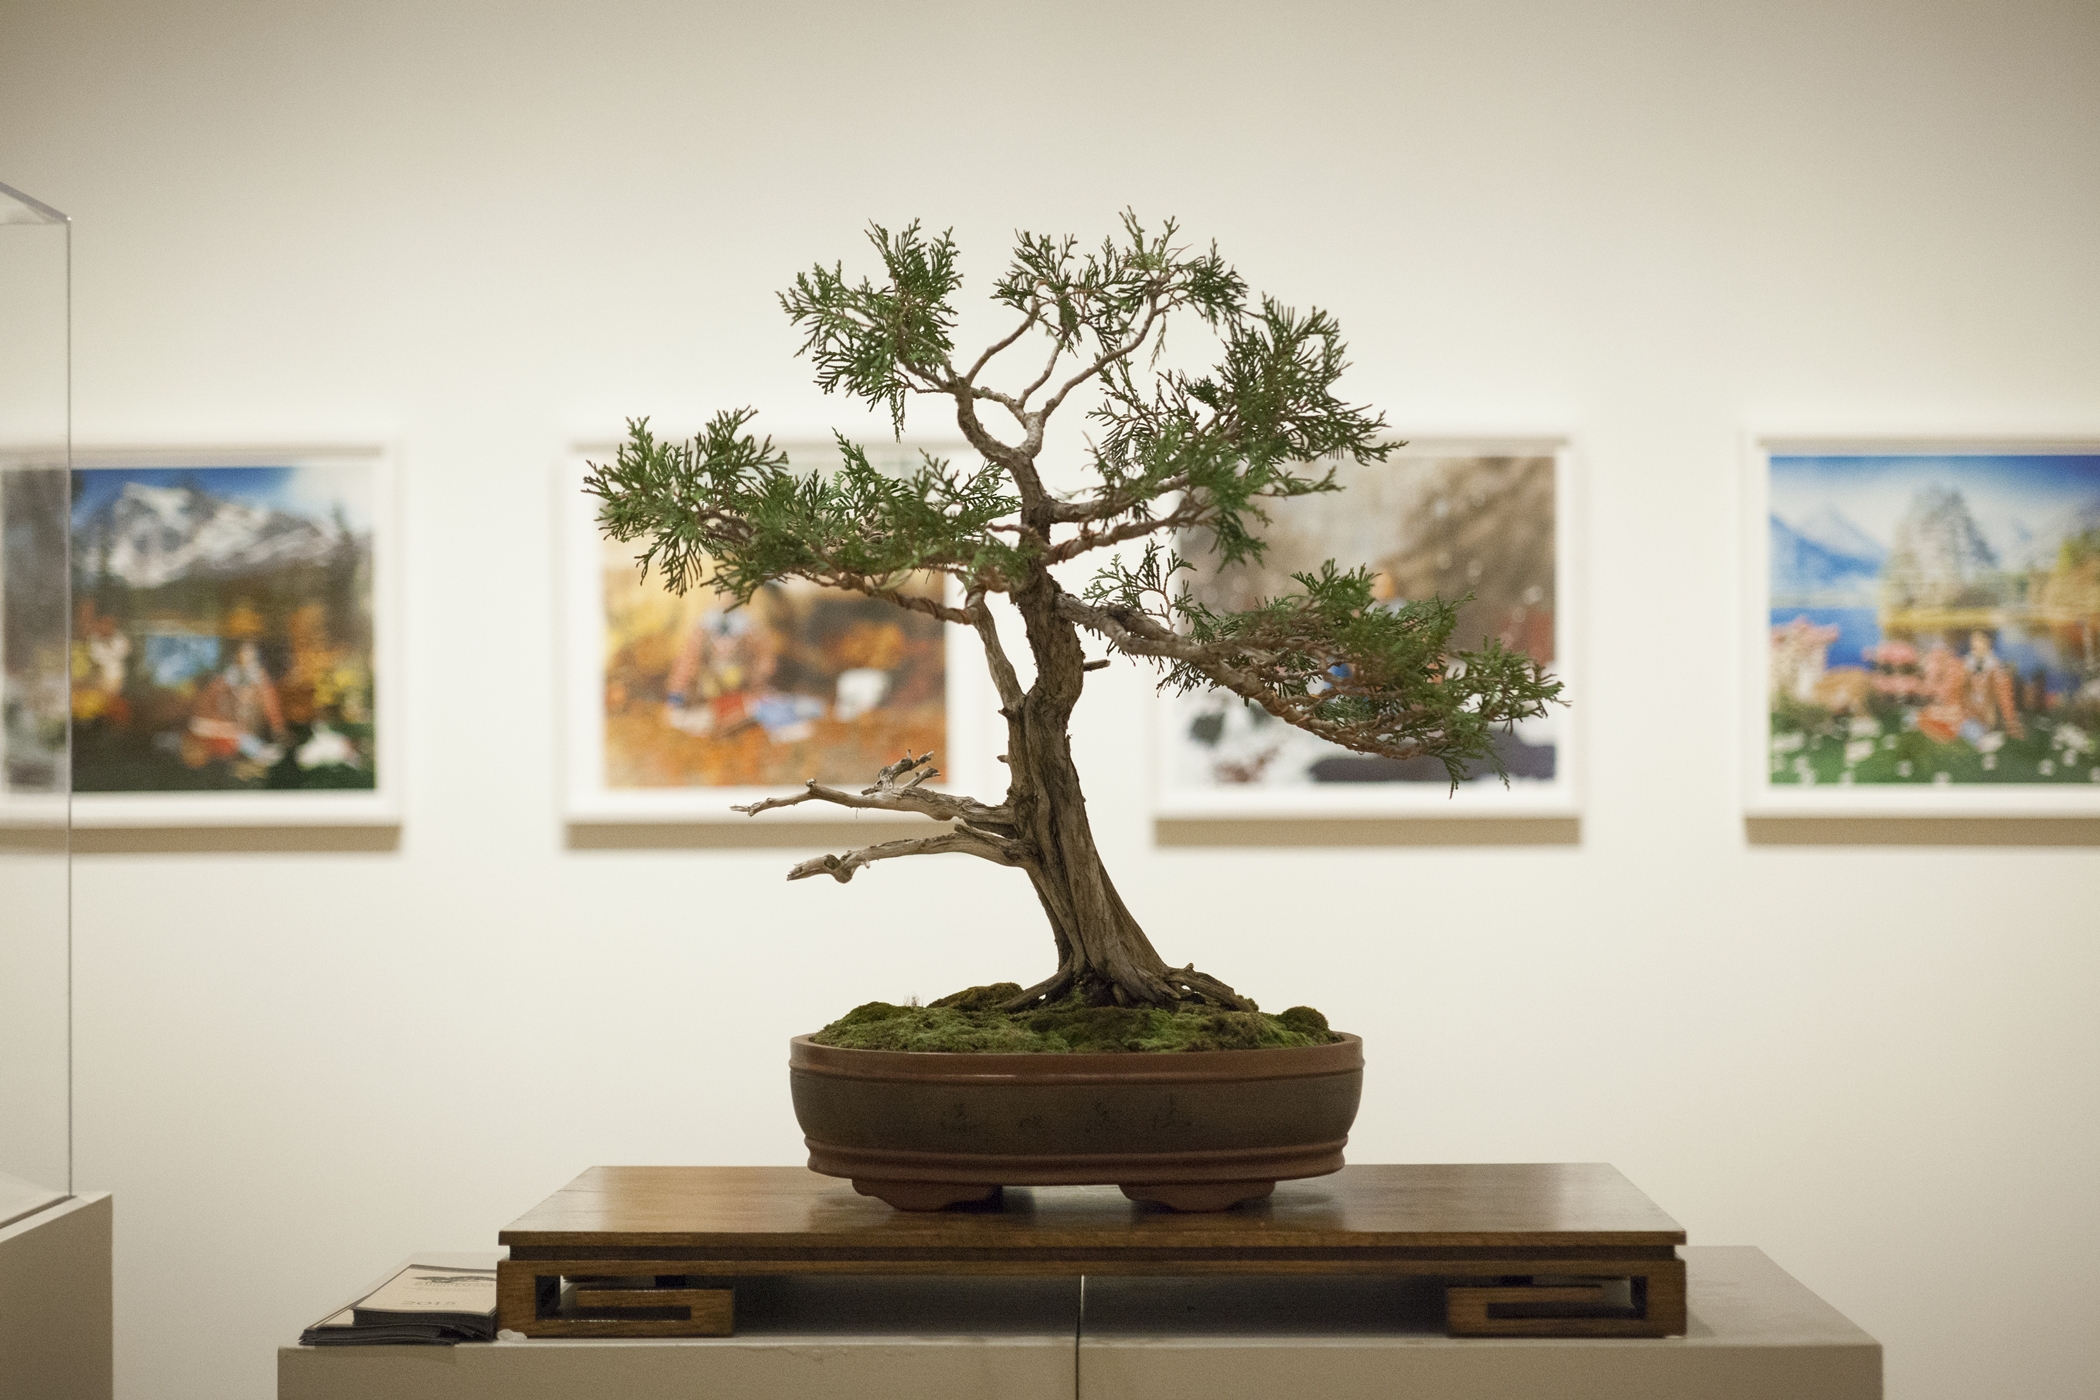 Art in Bloom 2015: Timeless Art & Fresh Flowers; Thursday April 30 - Sunday May 3, 2015; The 32nd year of Art in Bloom, a four-day festival of fresh floral arrangements and fine art, presented by the Friends of the Institute at the Minneapolis Institute of Arts.